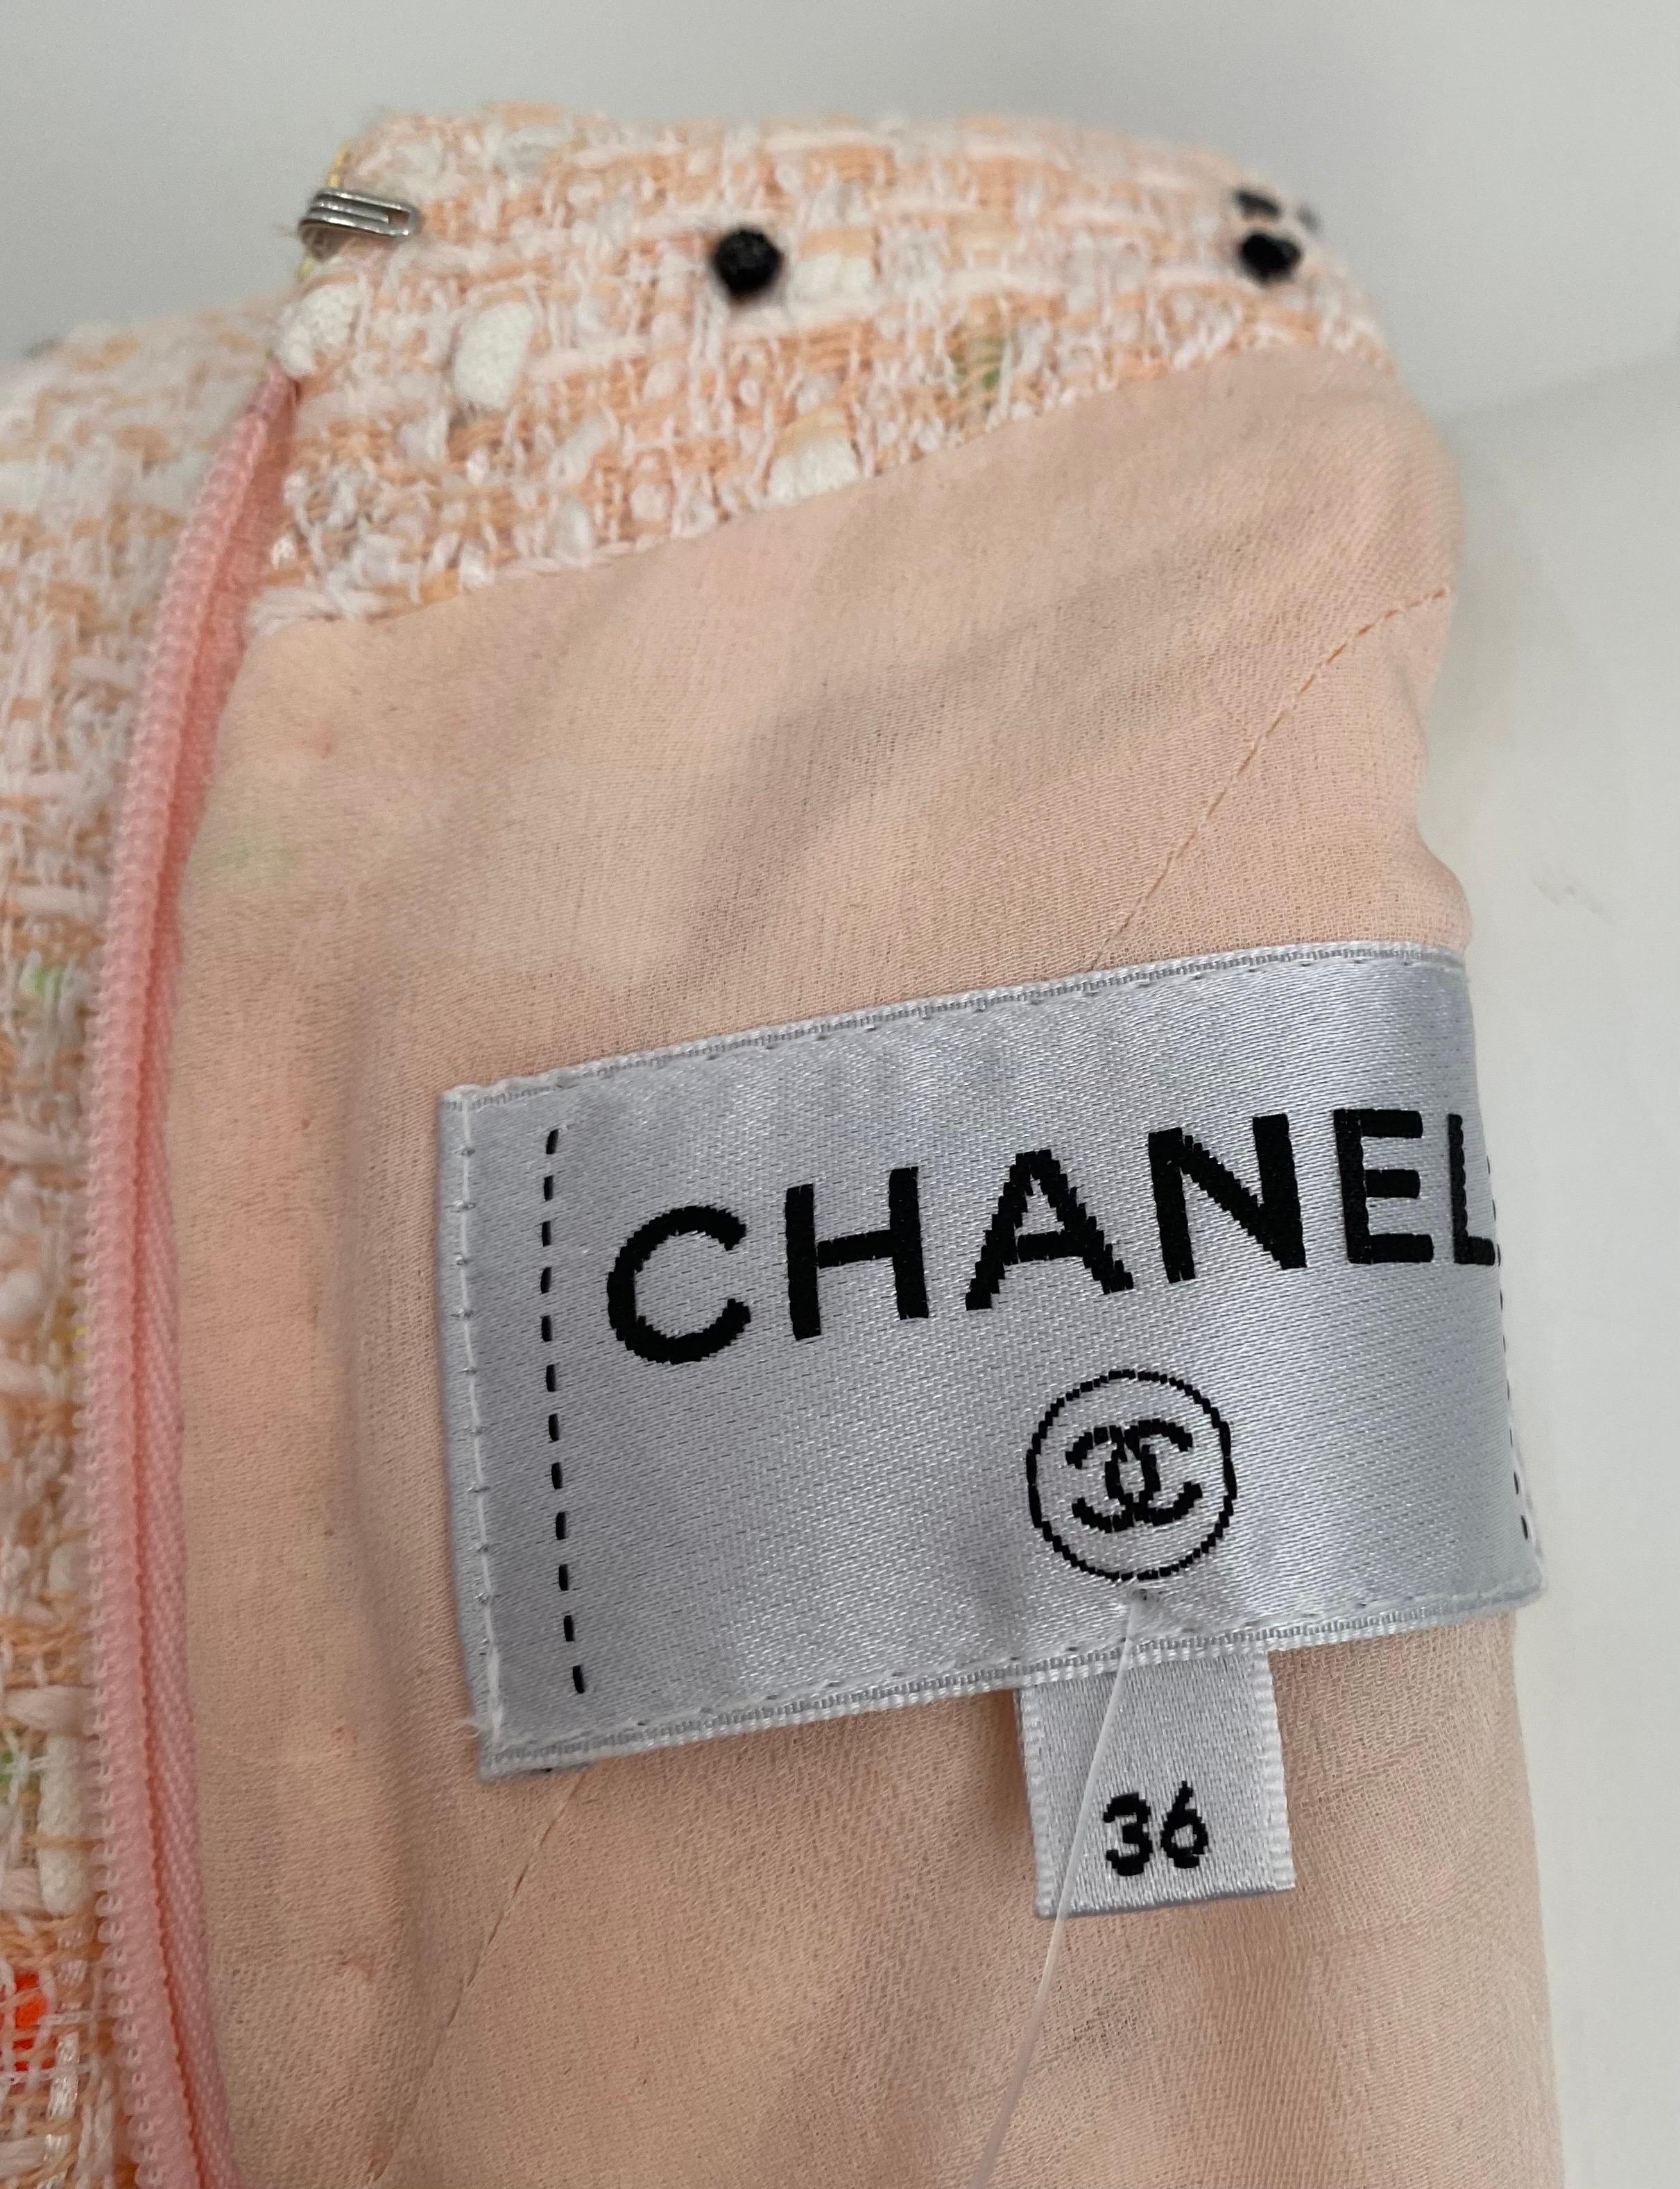 Chanel Peach and multi dot tweed Dress with removable lace detail - Sz 36 4